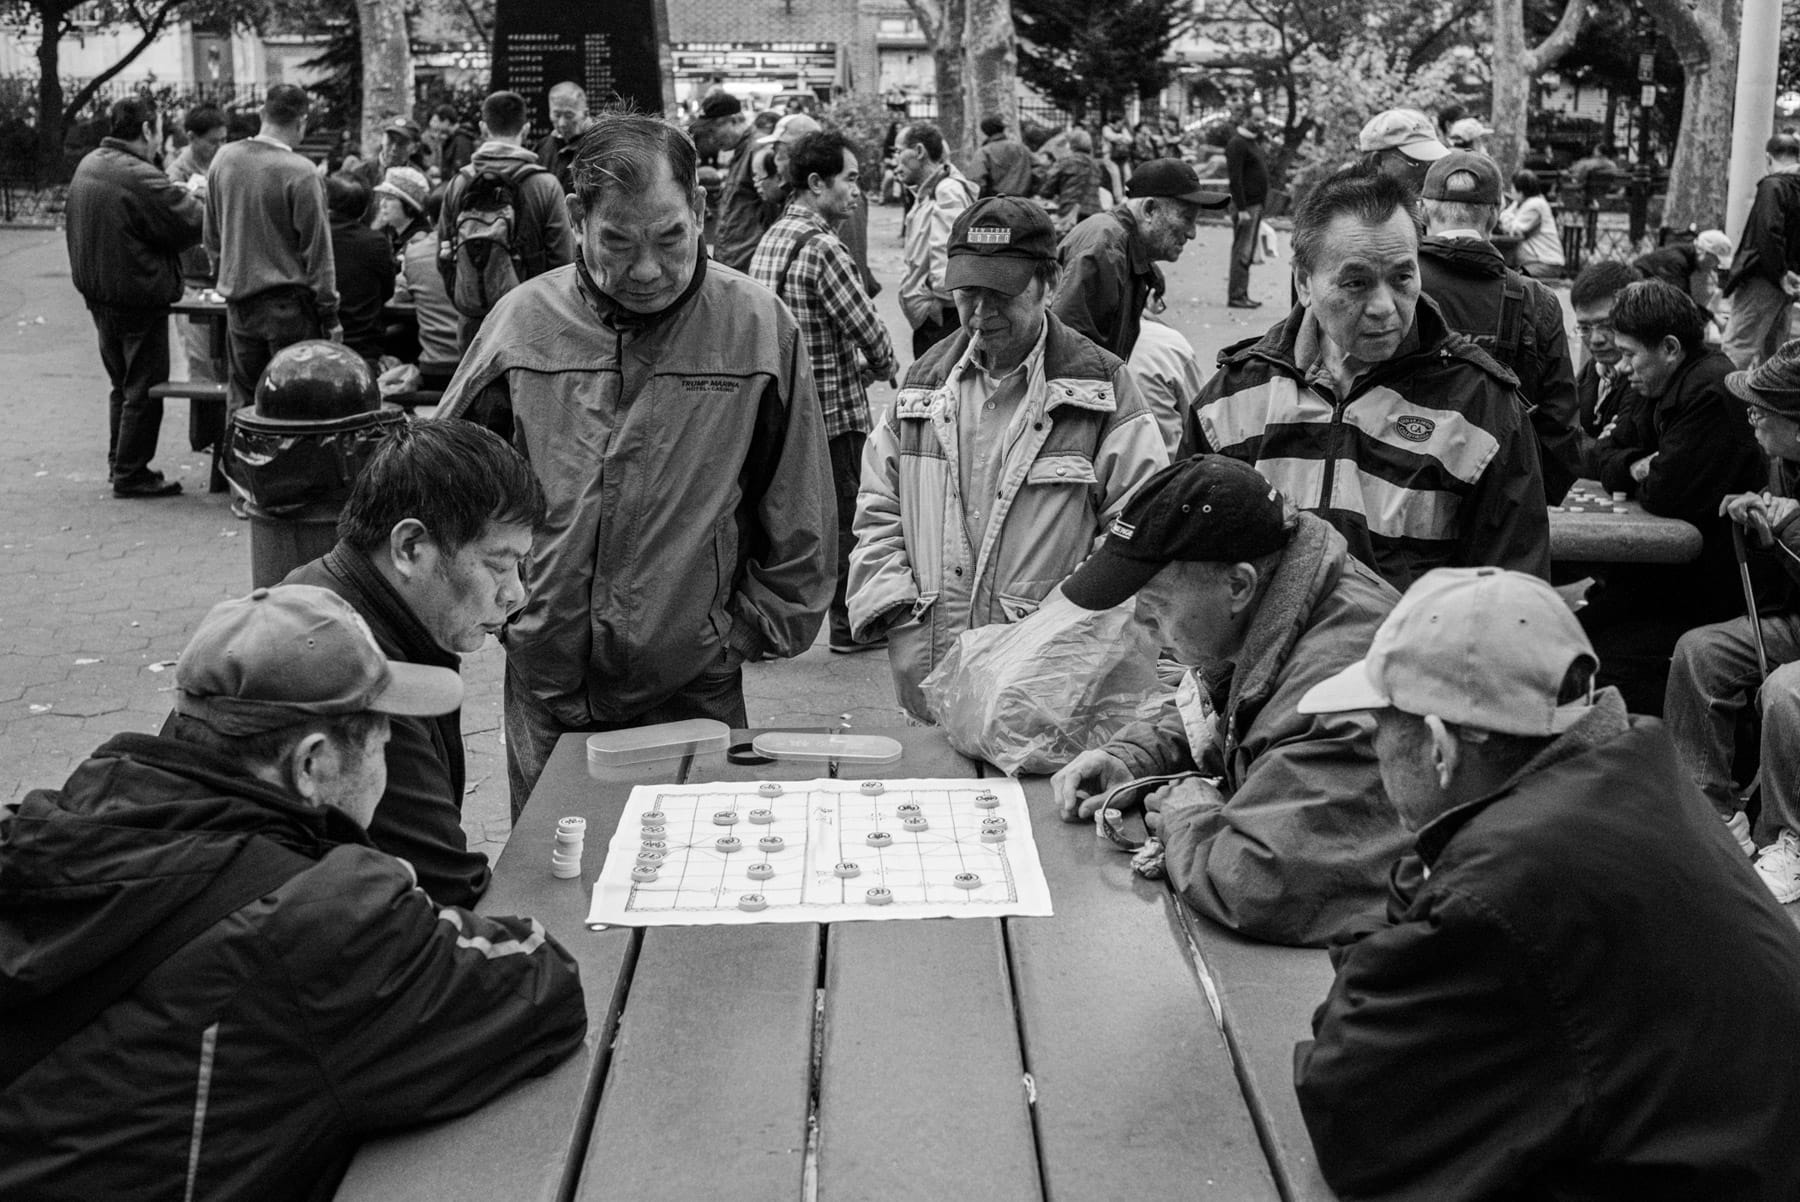 Chinese Chess / Xiangqi Players in Columbus Park, Chinatown, NYC - Guney Cuceloglu for the New Yorker Life